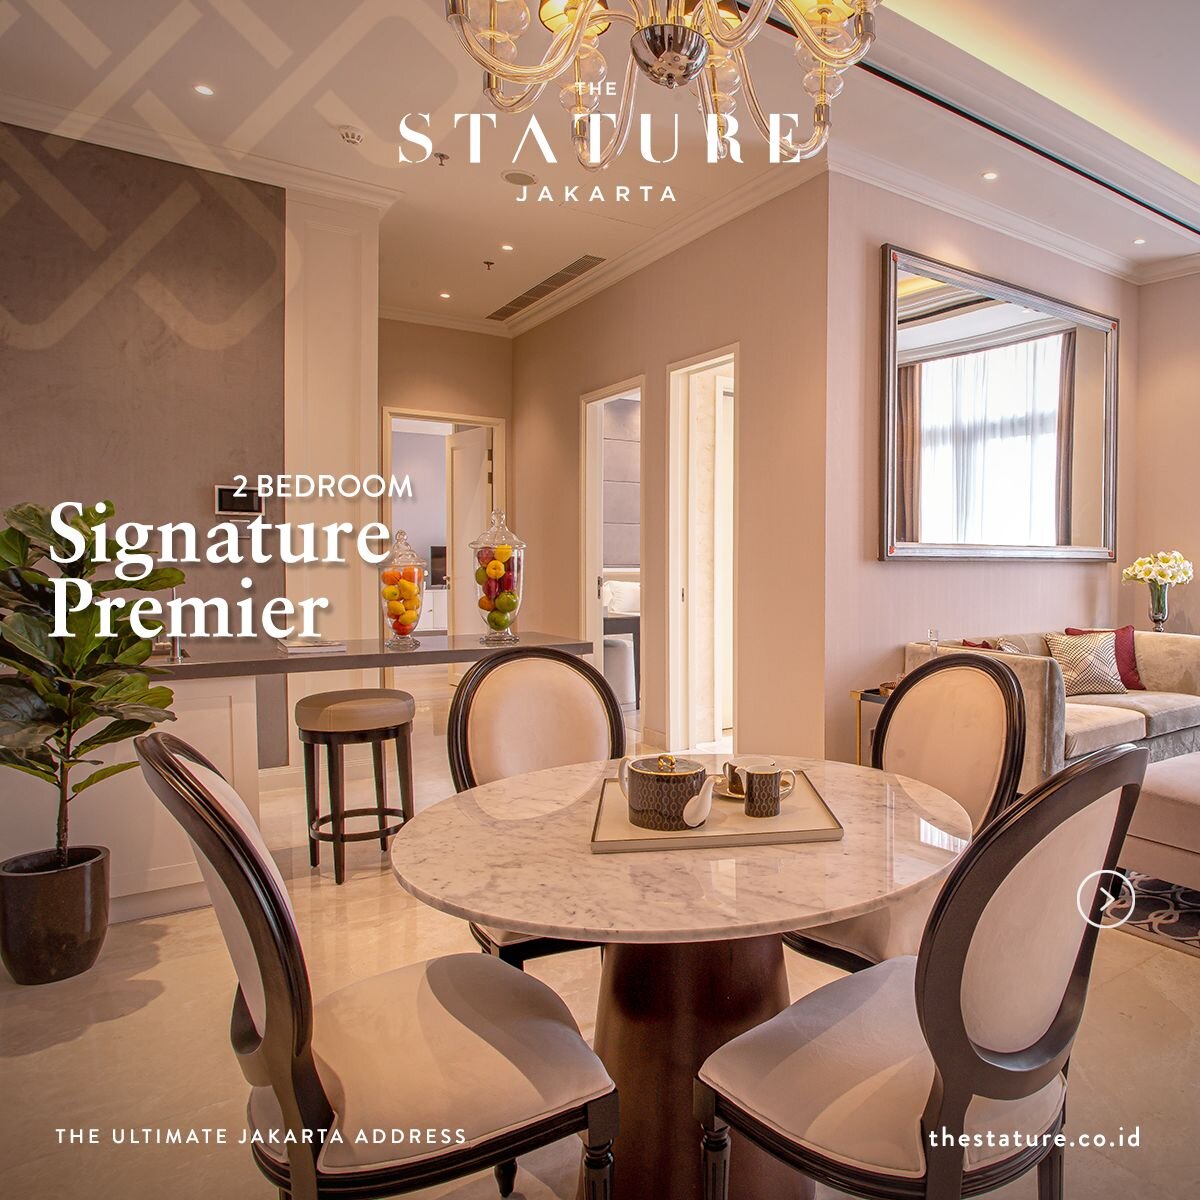 Life is too short to settle for less. Experience the #StatureLiving and appreciate the little things that make a big difference.

Contact us today for more information and elevate yourself with our 2 Bedroom Signature Premier unit.

𝗧𝗵𝗲 𝗦𝘁𝗮𝘁𝘂